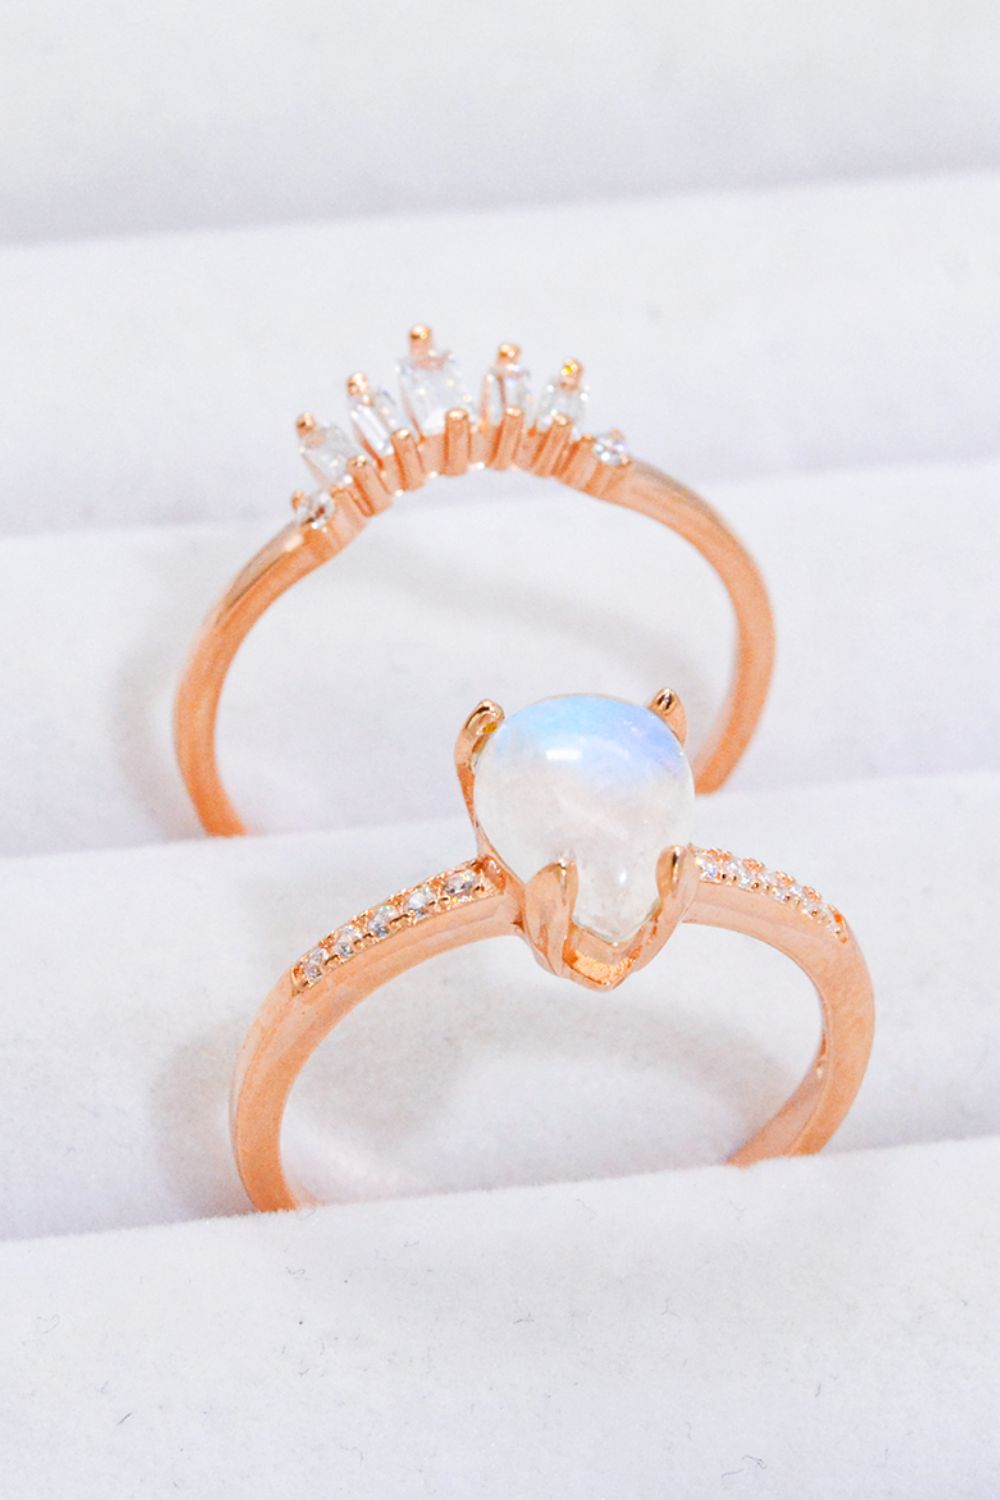 Rose Gold Natural Moonstone and Zircon Ring SetRingBeach Rose Co.